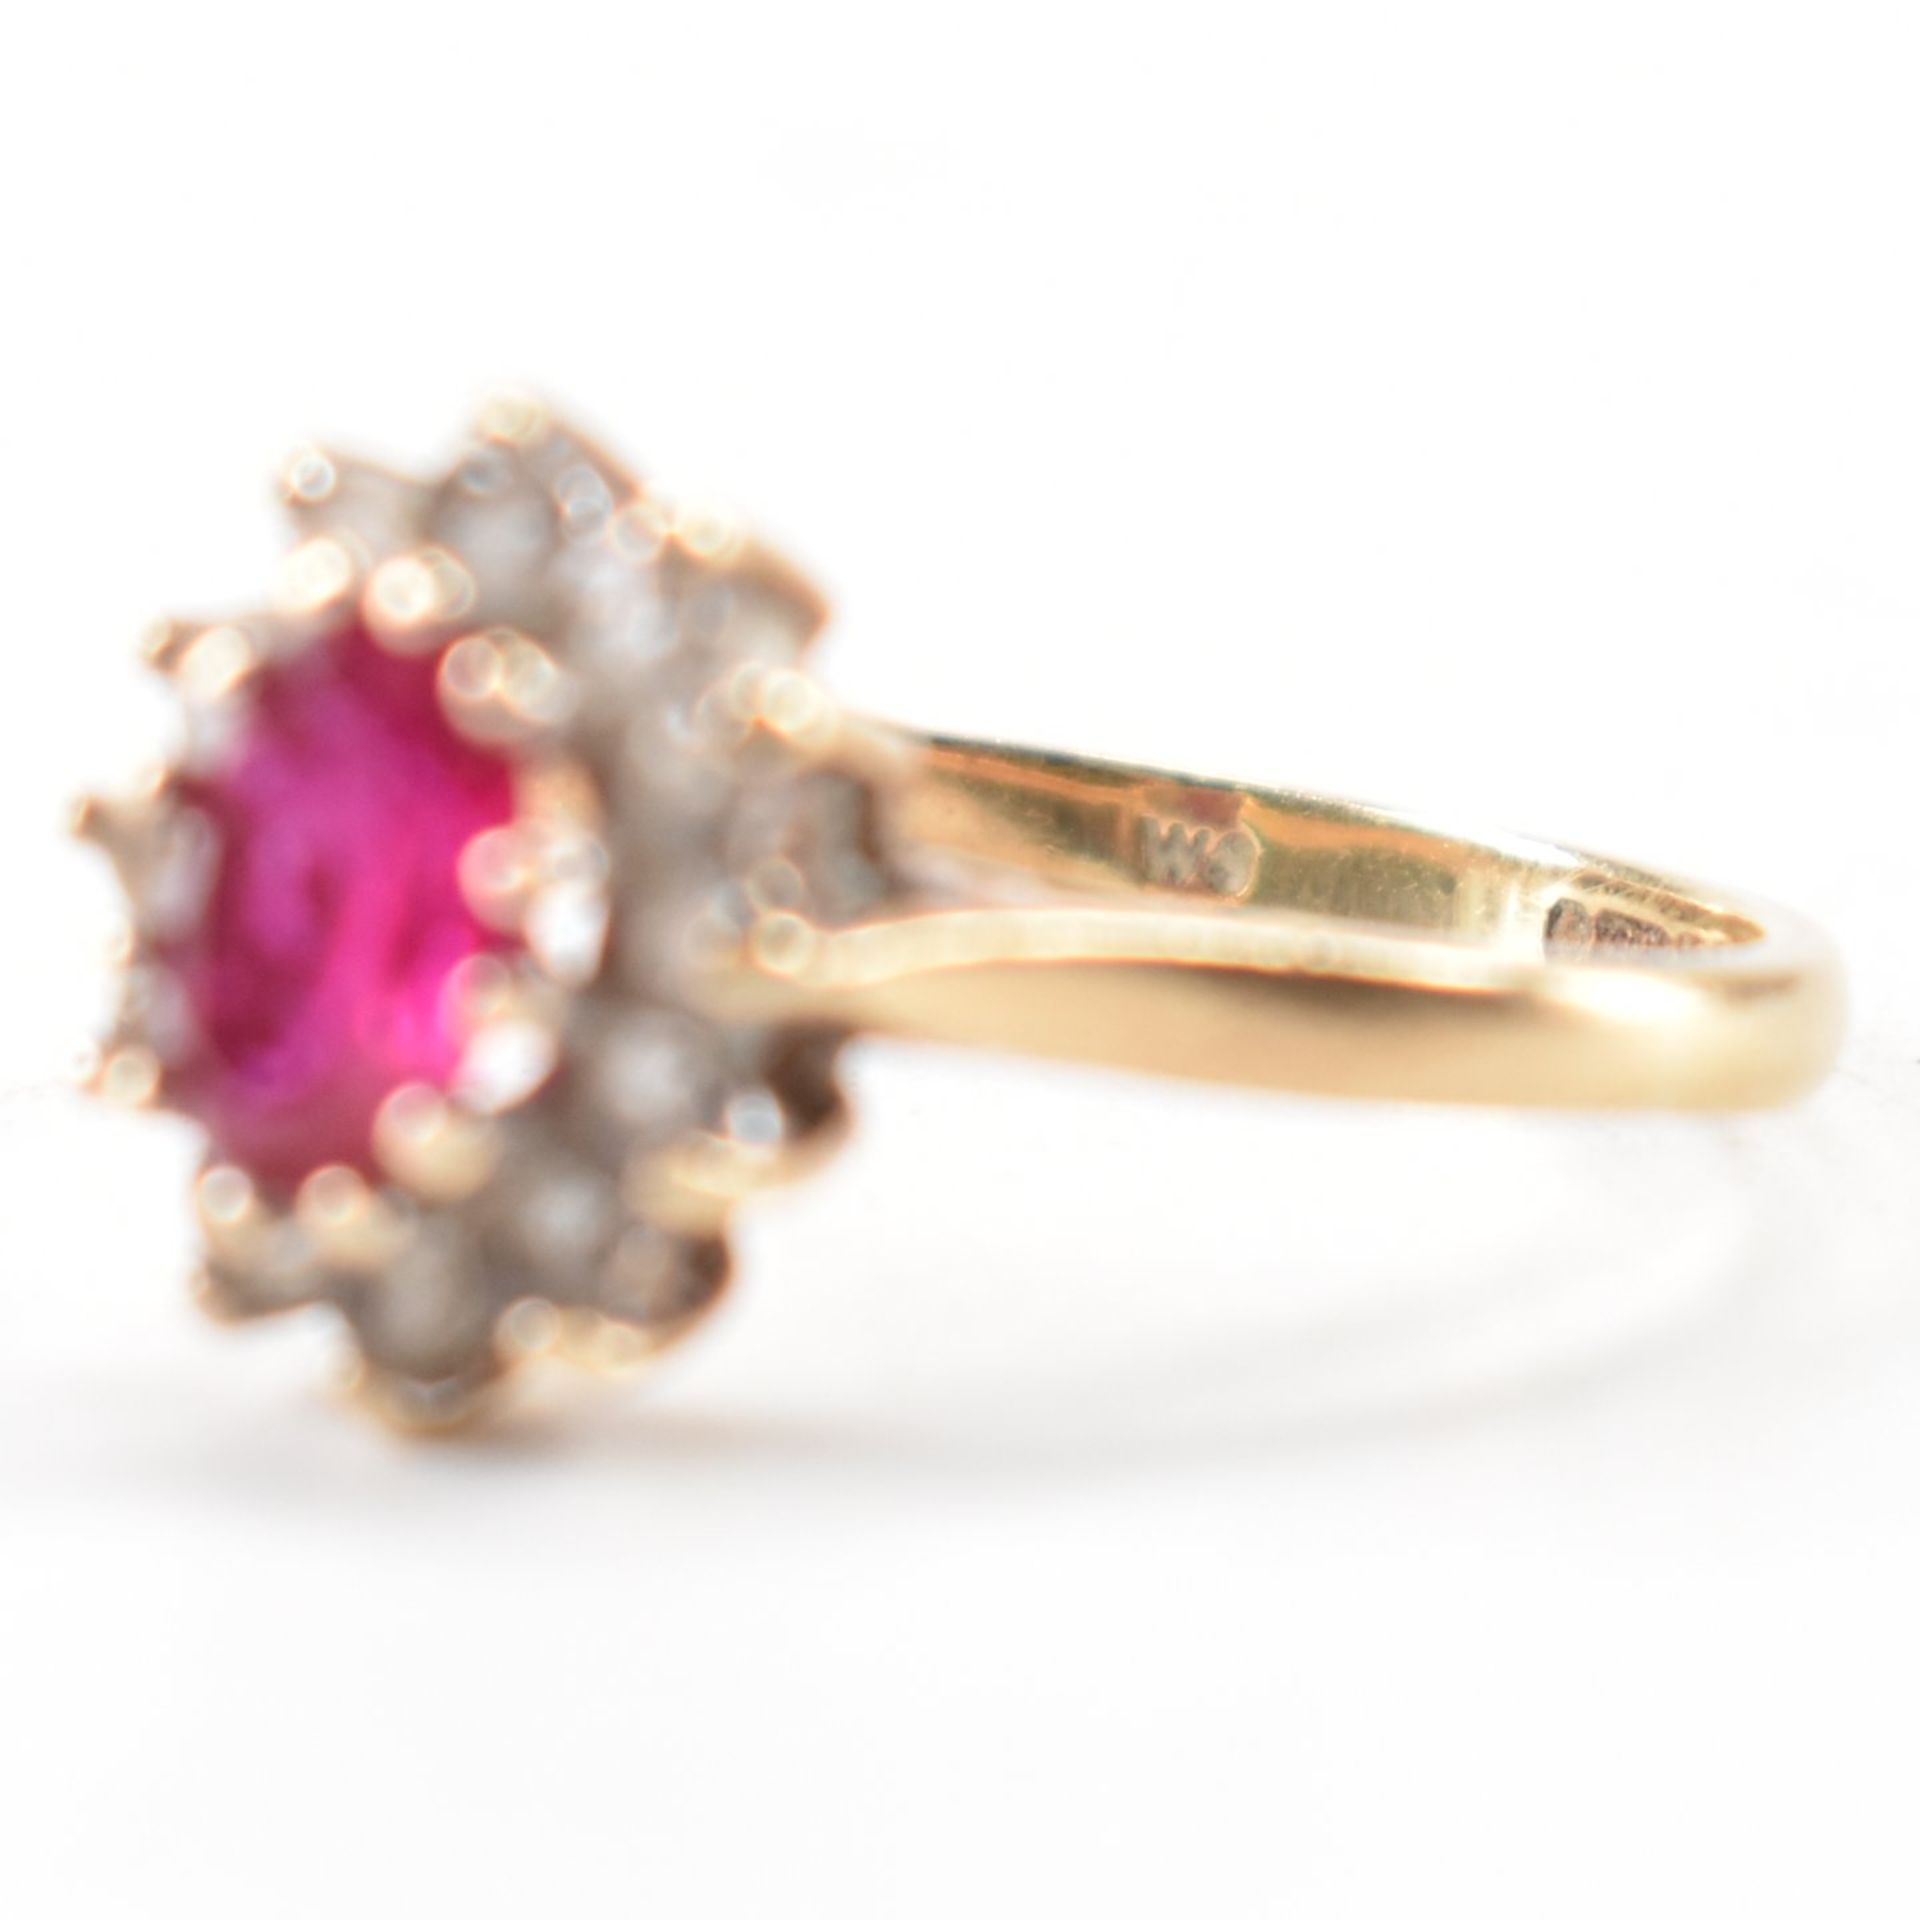 HALLMARKED 9CT GOLD PINK & WHITE STONE CLUSTER RING - Image 6 of 8